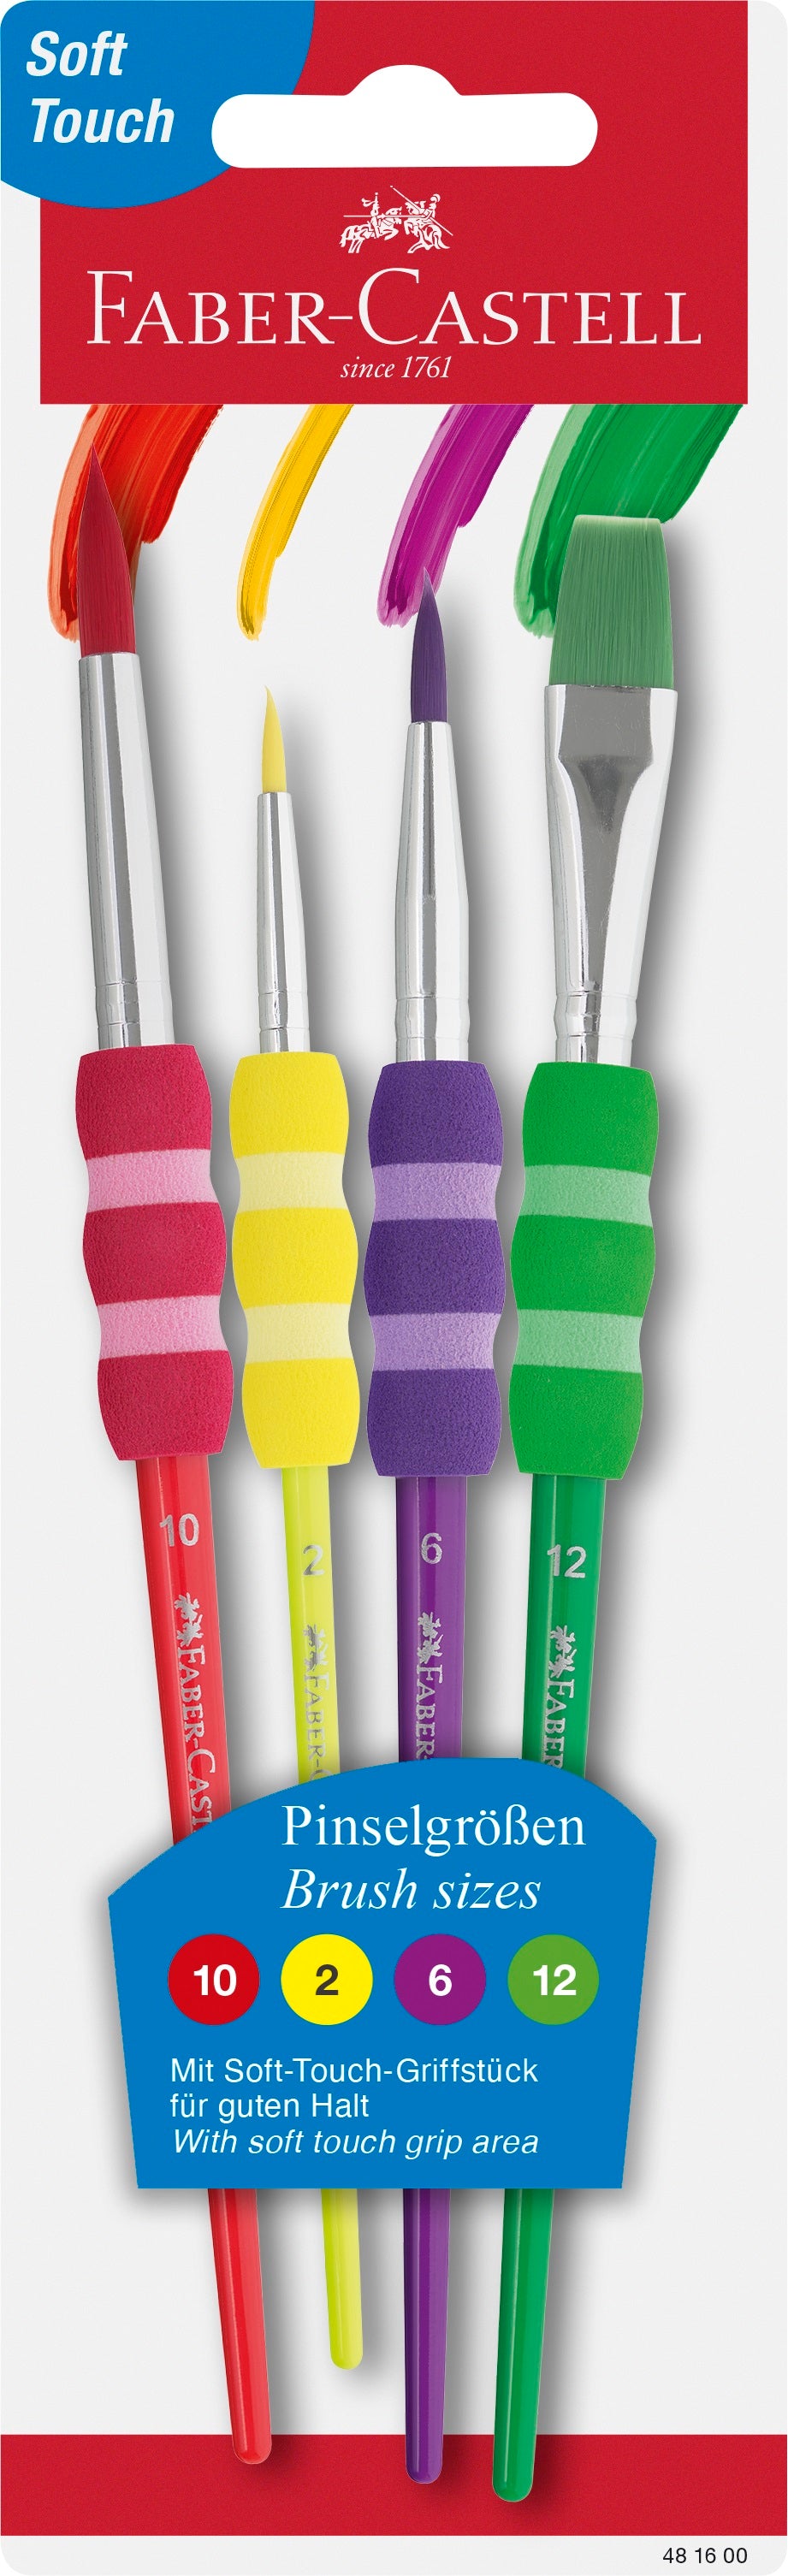 Retail packaging for a pack of 4 Faber Castell paint brushes. The packaging shows brushes are different colours and widths with a comfortable grip on each.